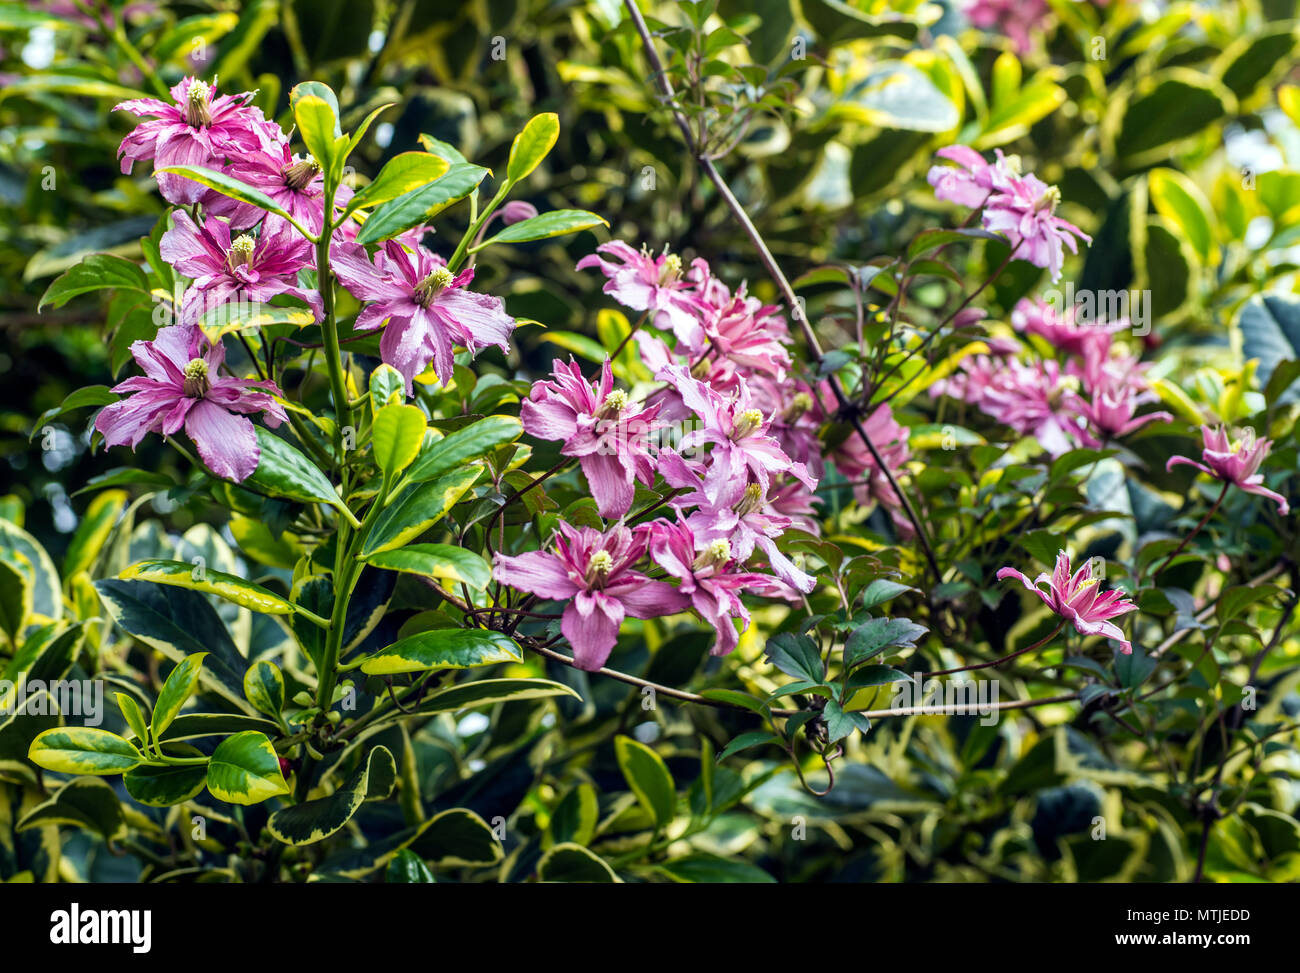 Pink clematis montana weaving through the branches of a variegated holly tree Stock Photo